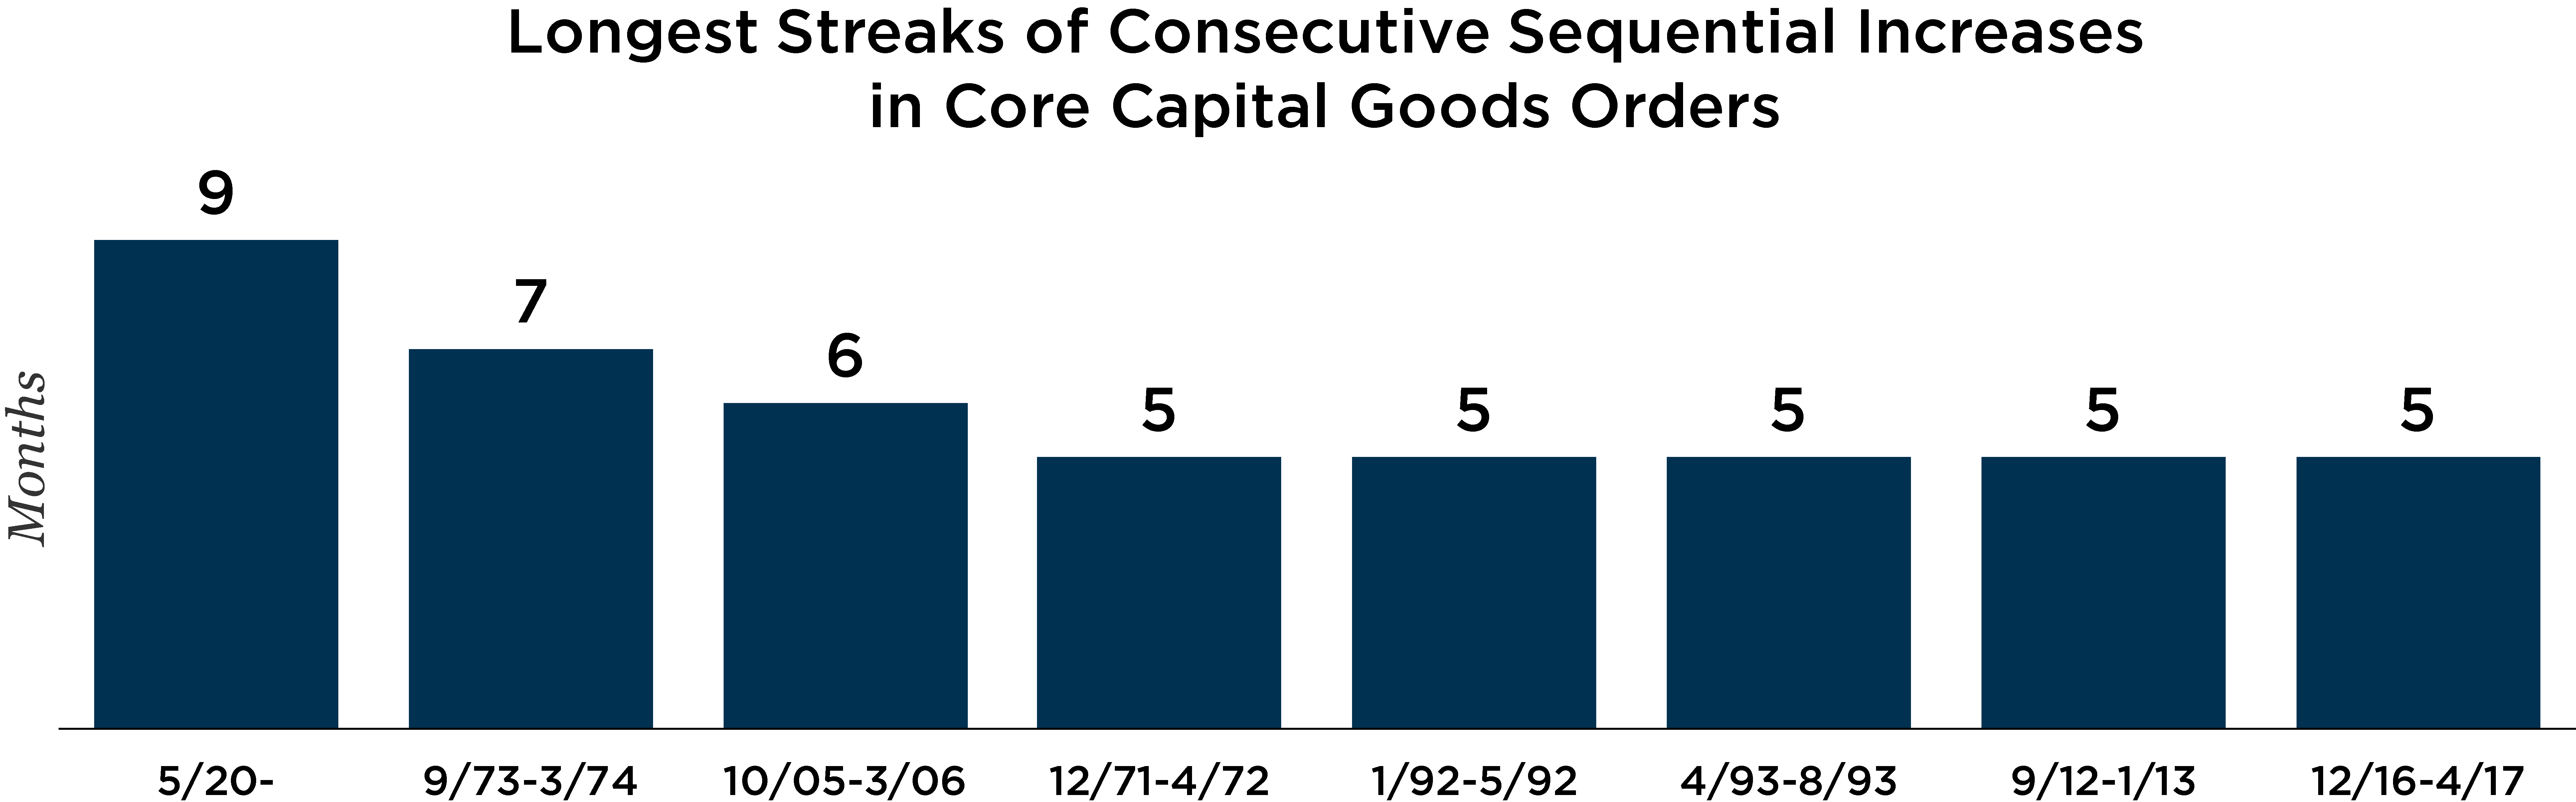 graph depicting longest streaks of consecutive sequential increases in core capital goods orders